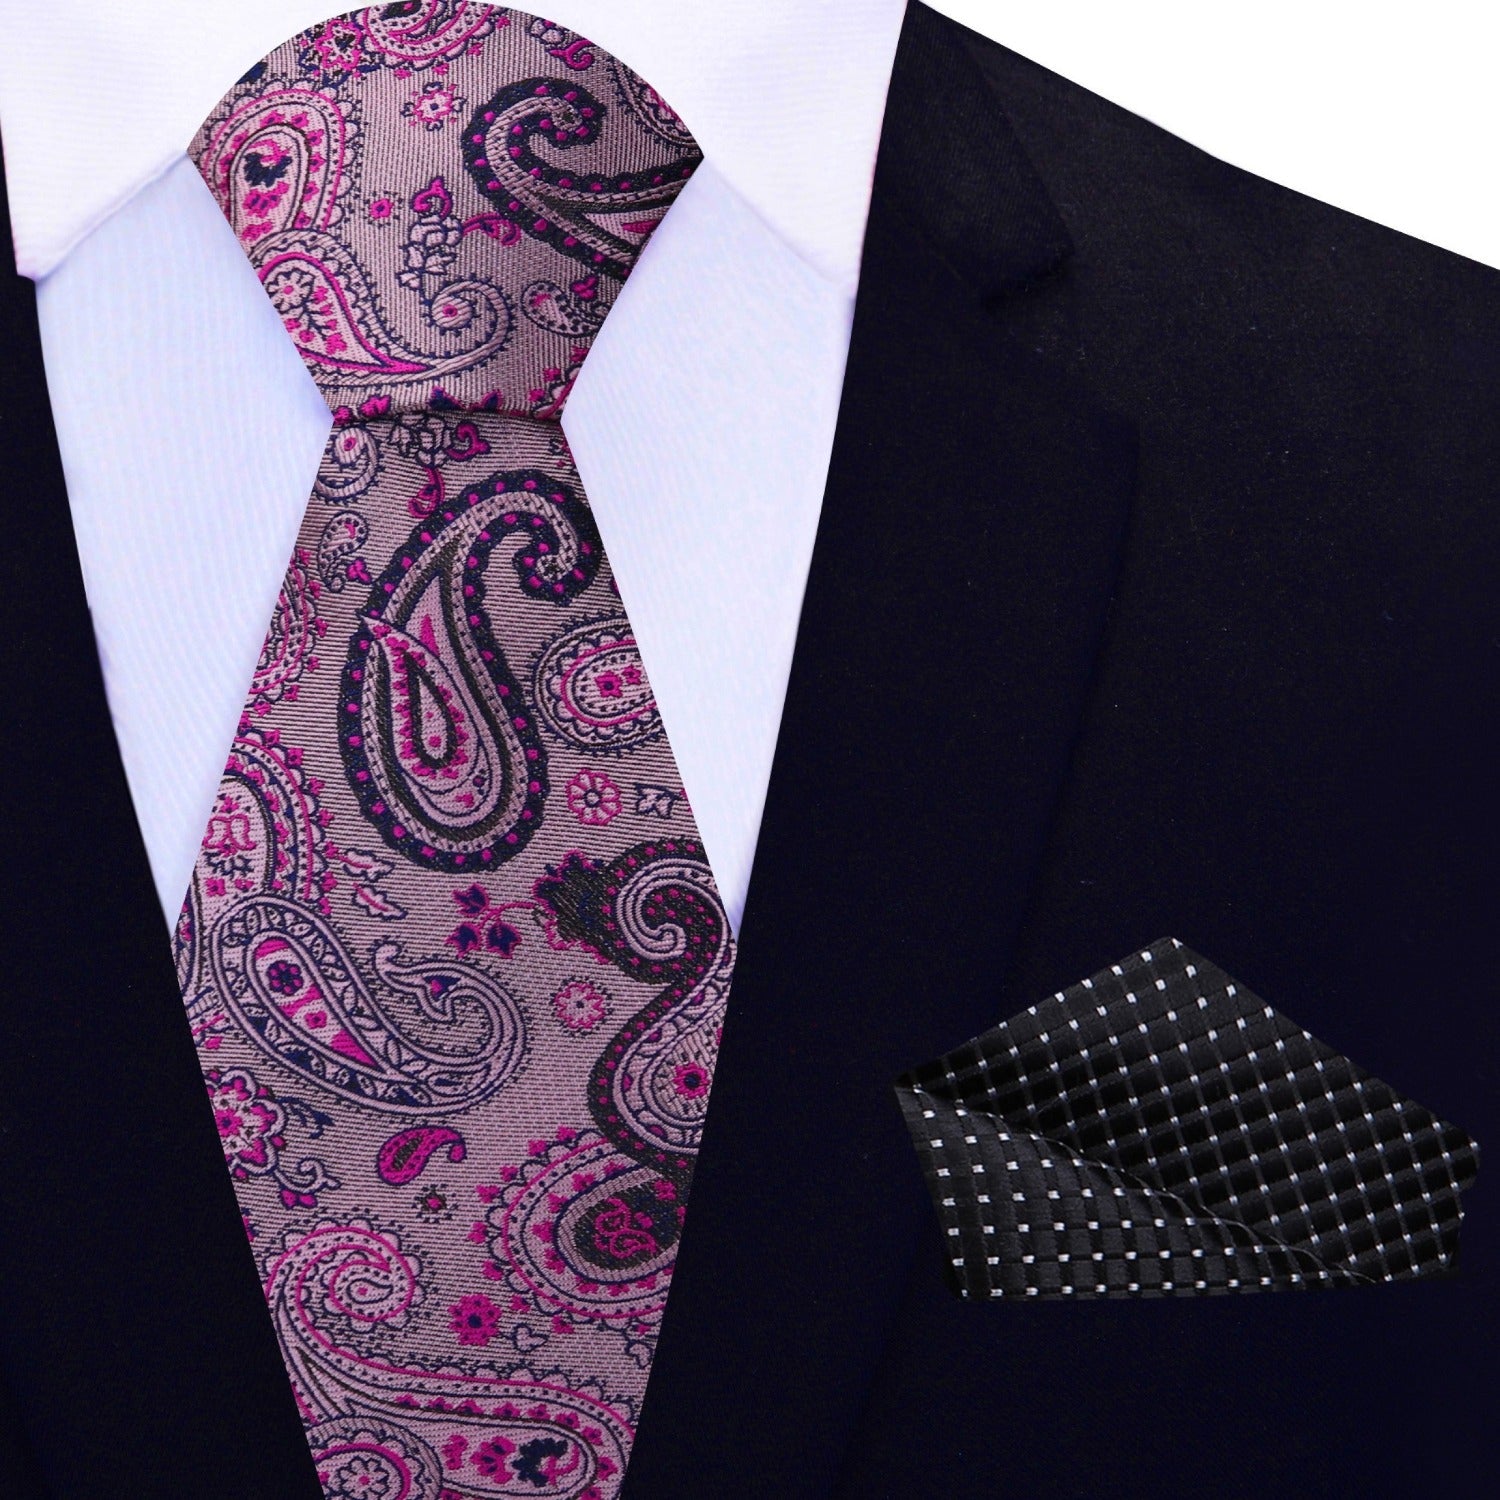 View 2: Pink, Black Paisley Necktie with Black Square